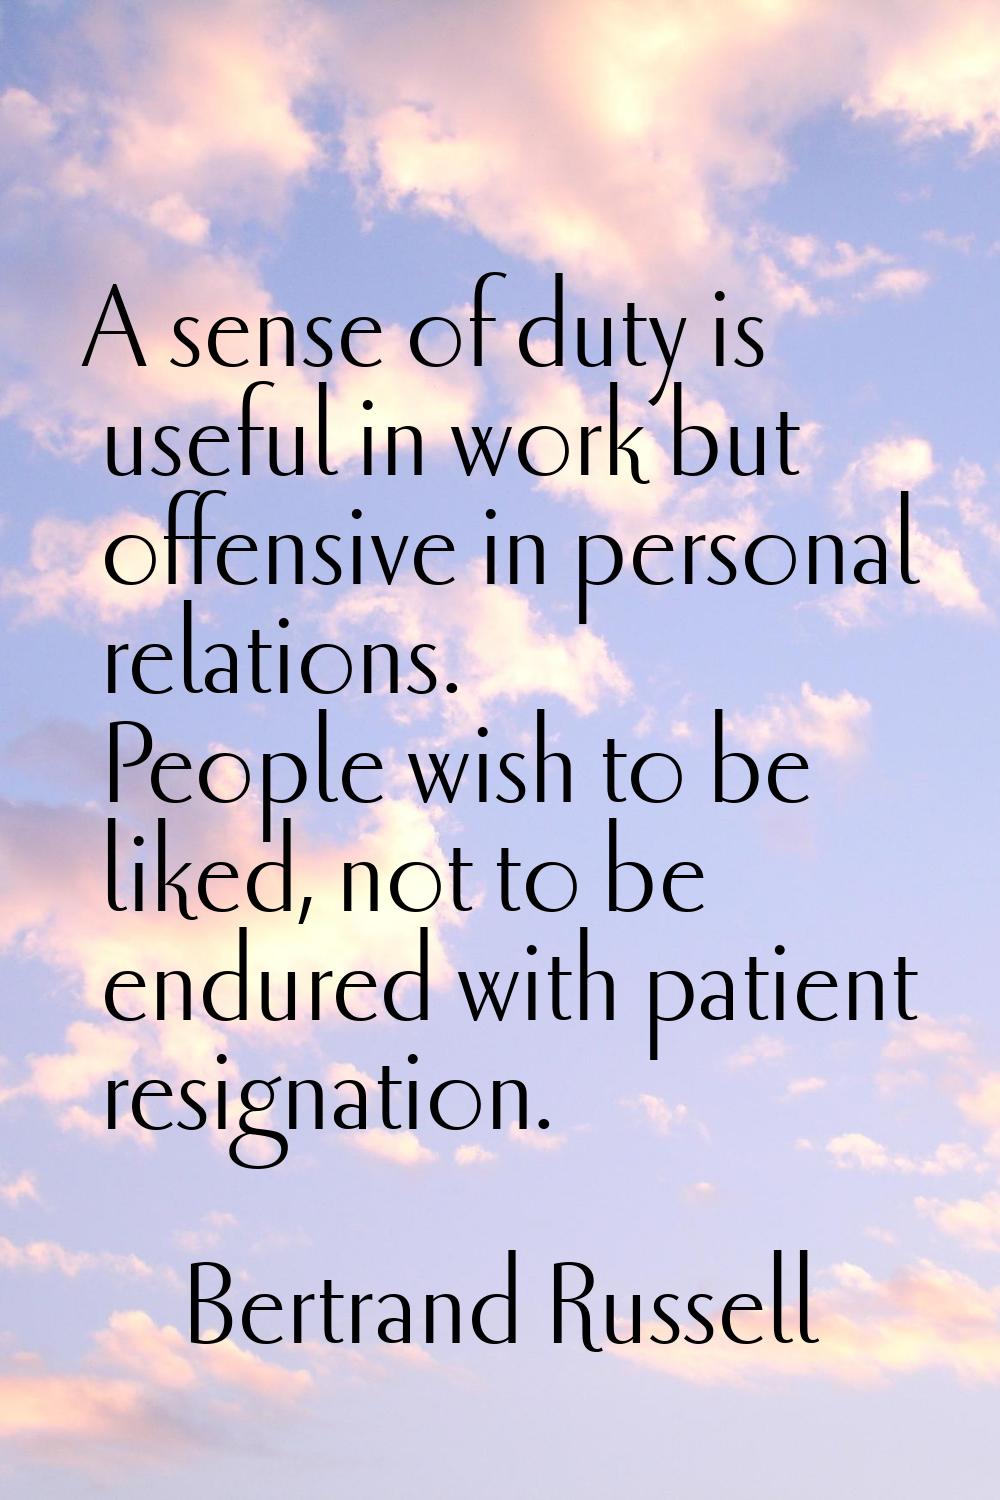 A sense of duty is useful in work but offensive in personal relations. People wish to be liked, not